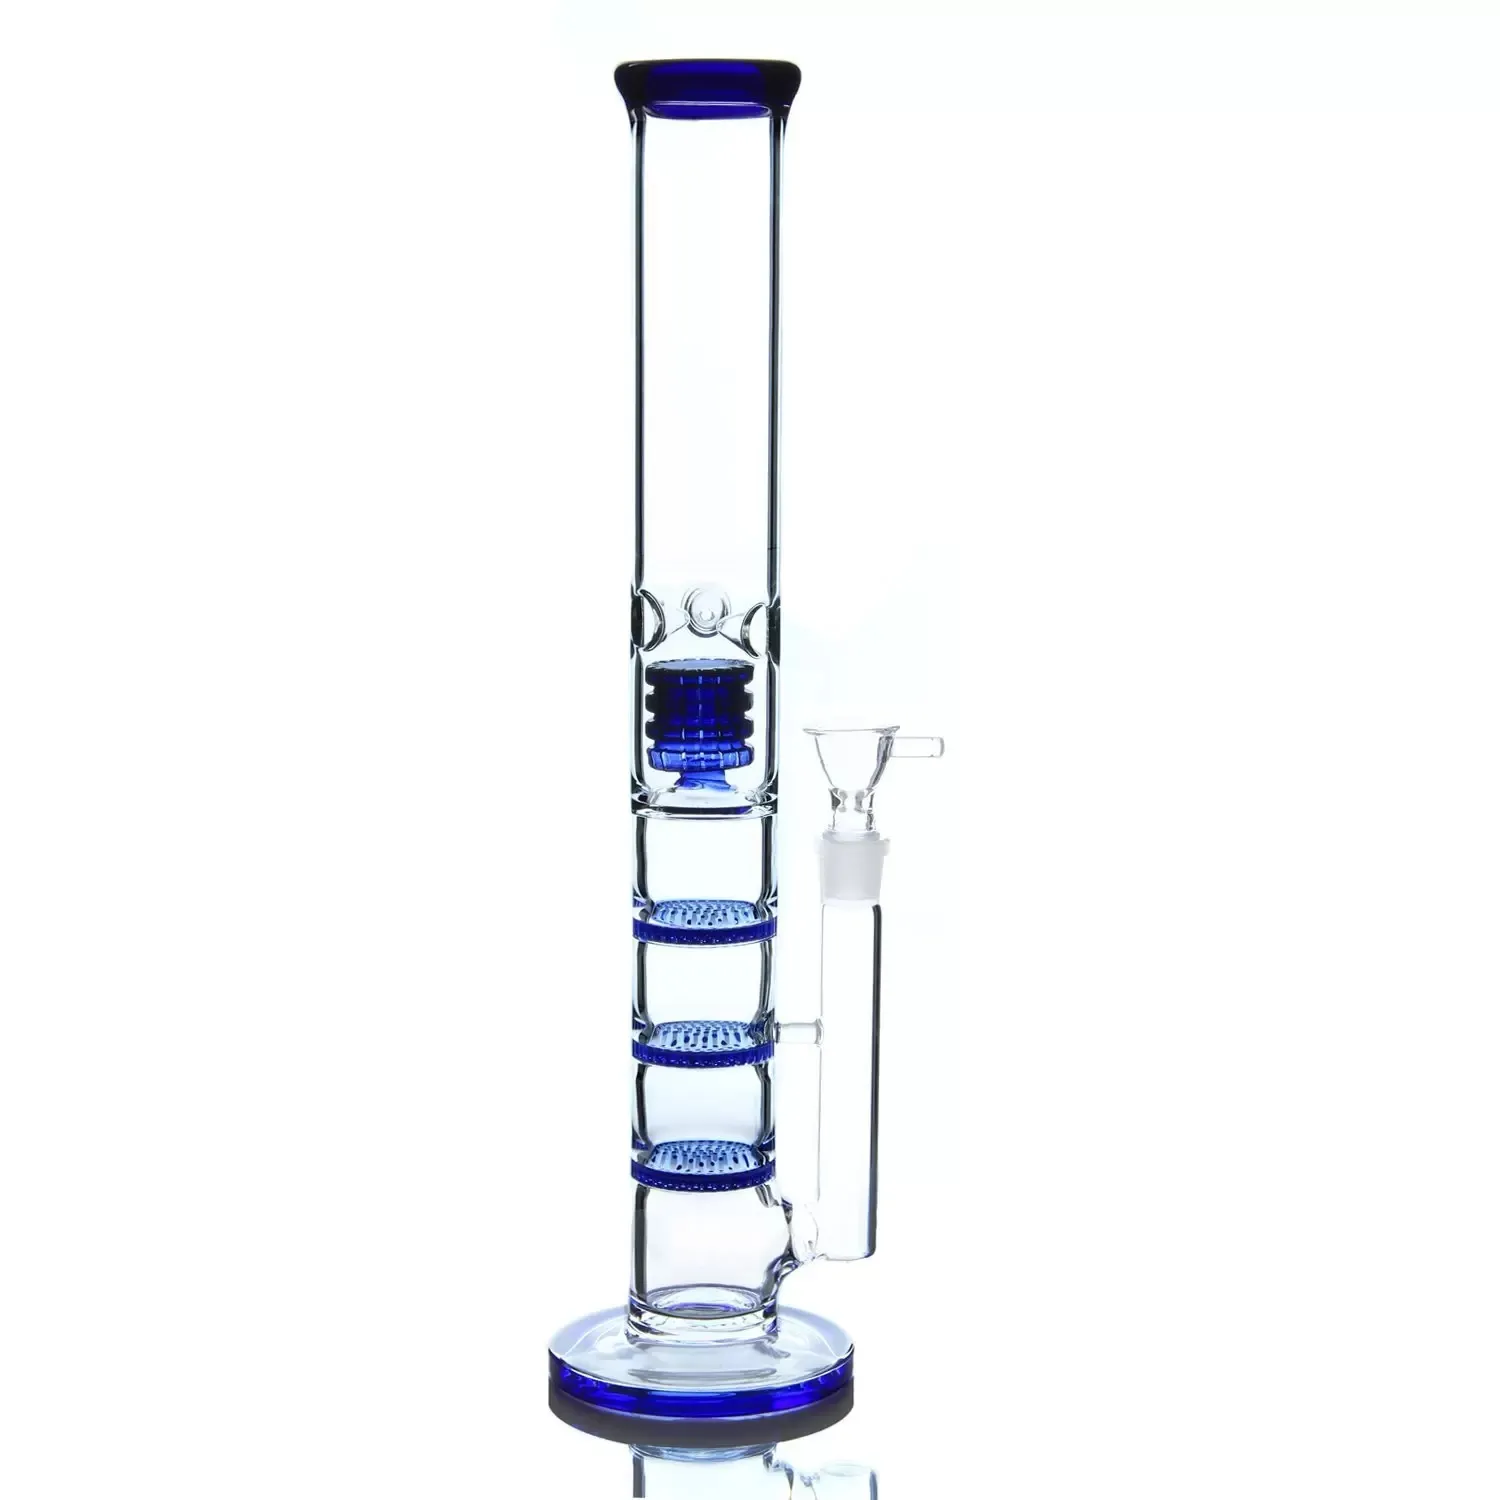 17 inch Glass Bong Smoking Water Pipe Honeycomb Percolator Hookah Dab Rig with 18mm 90 Degree Ash Catcher Tobacco Filter Pipes